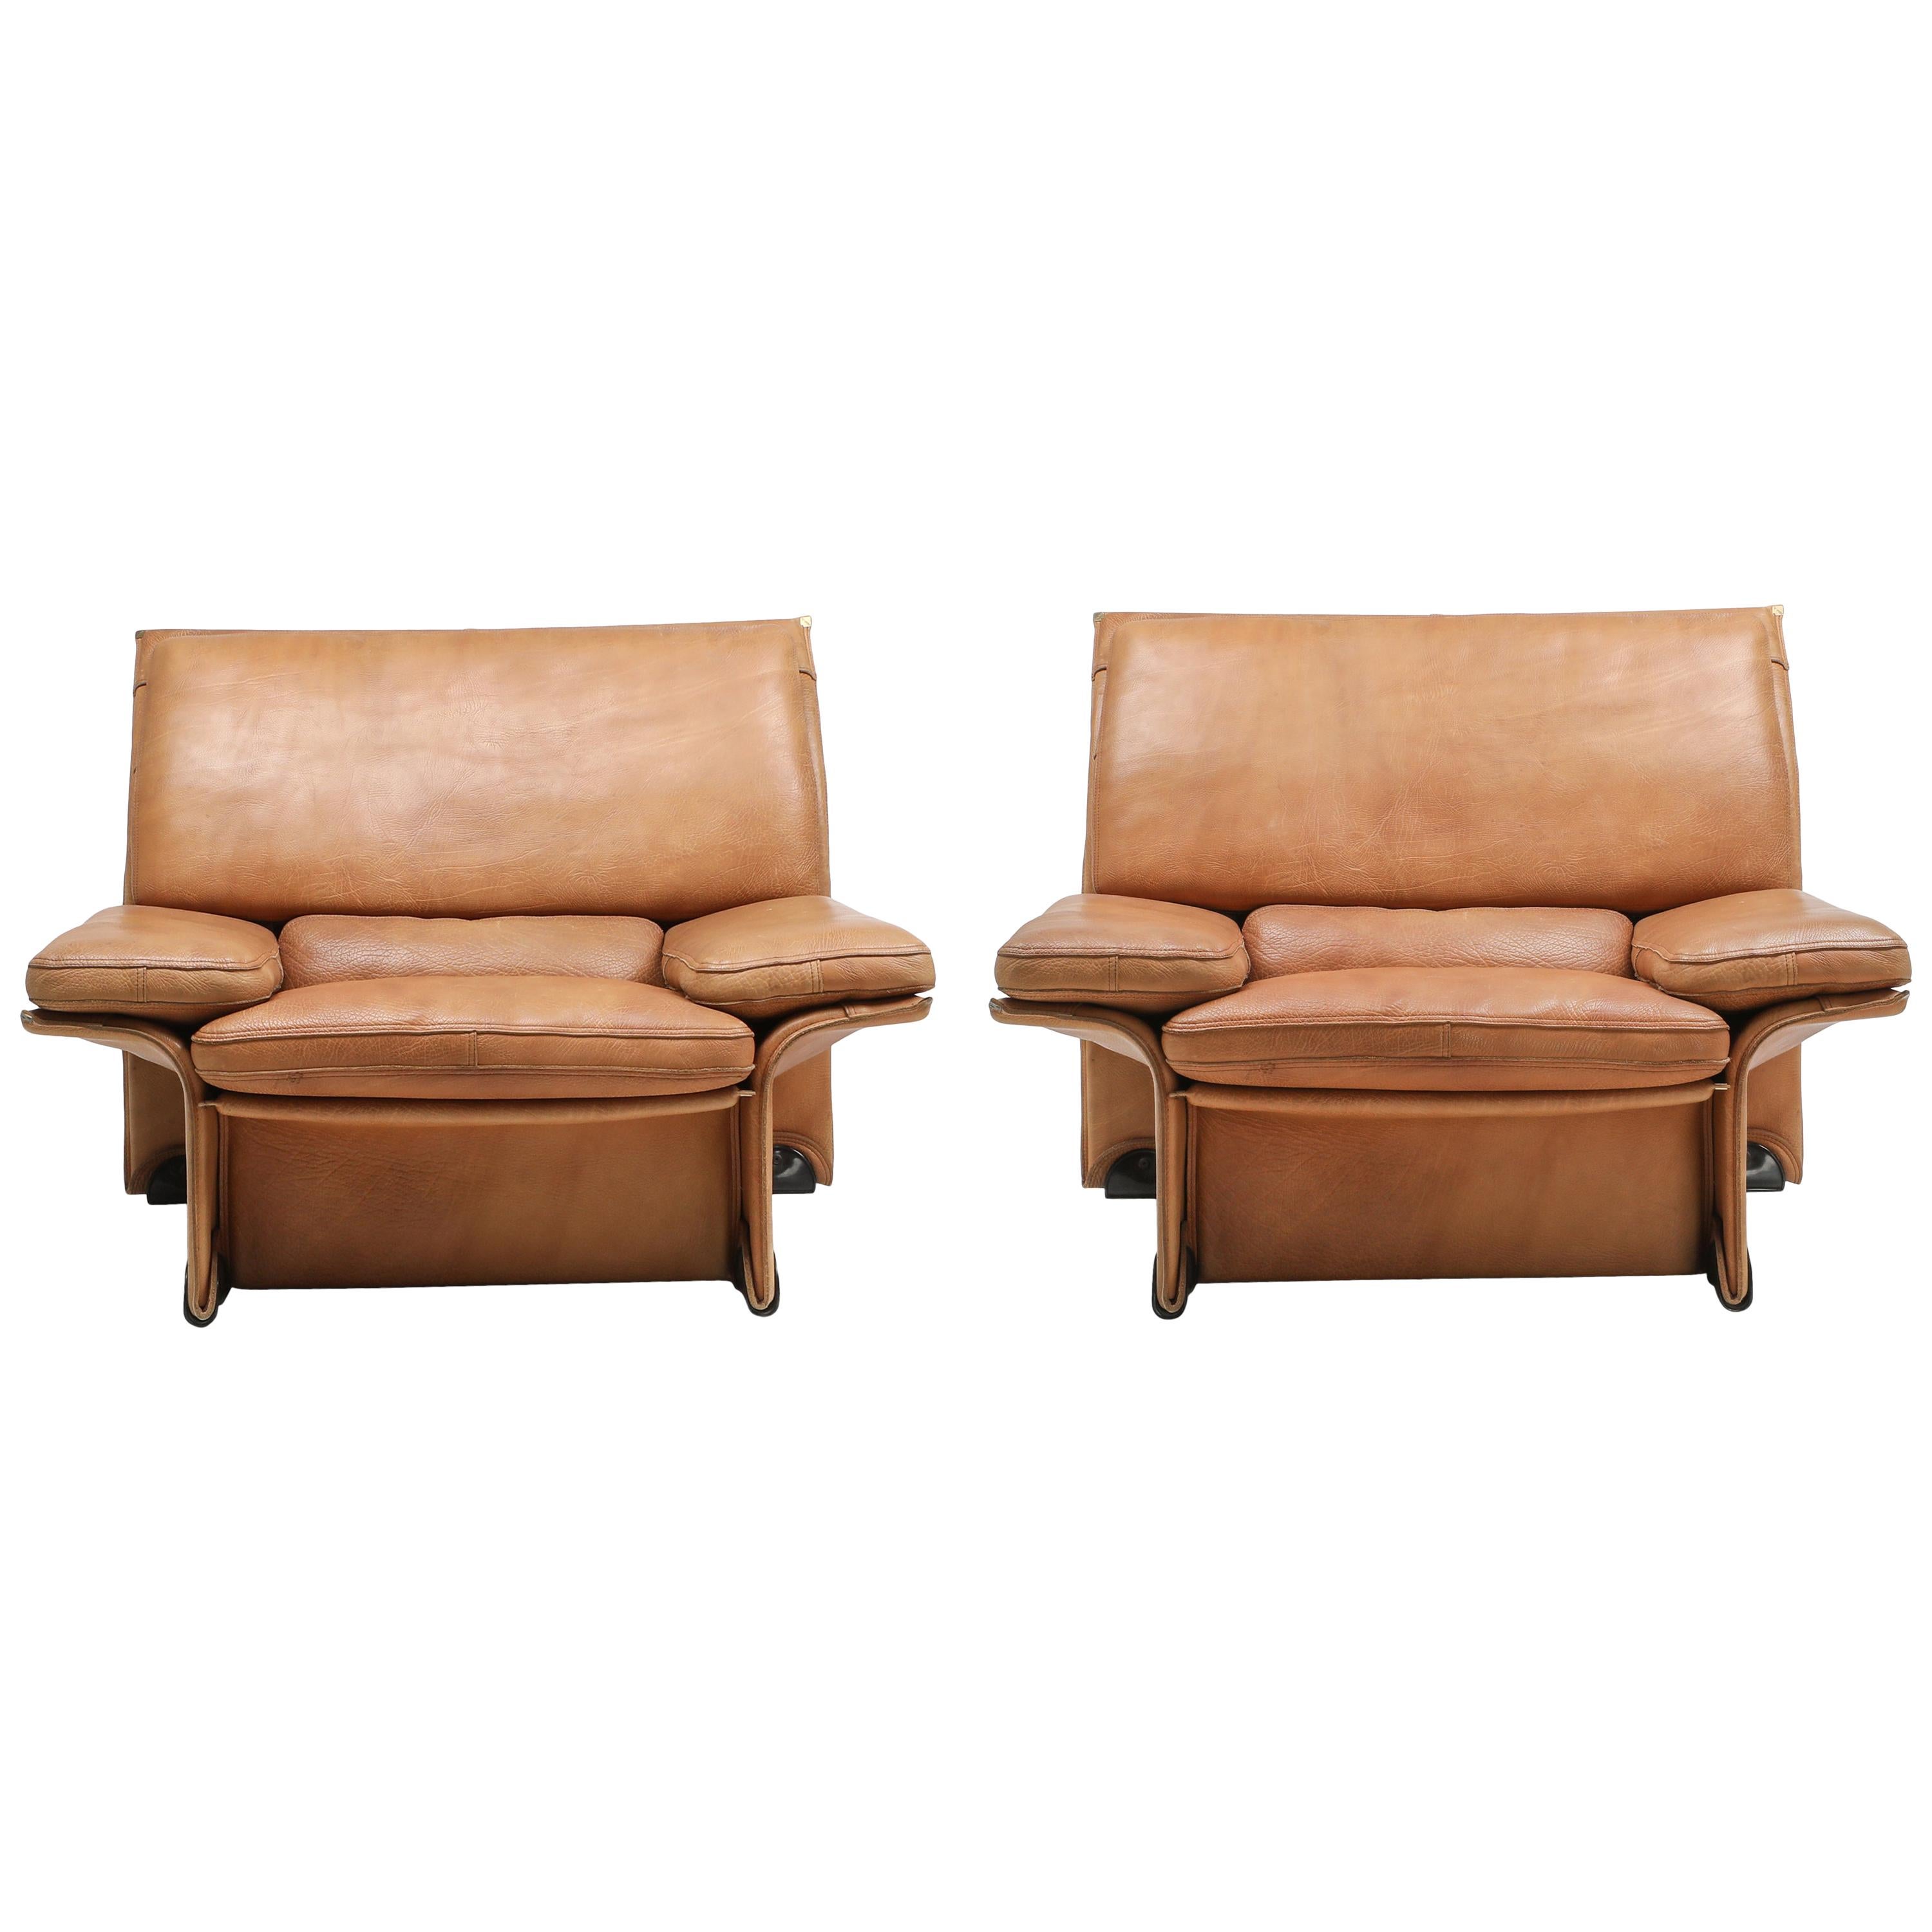 Buffalo leather, designed by Ammannati & Vitelli, 1976 for Brunati, Italy.
This pair of lounge chairs combines great design, the best quality of materials and amazing comfort.
Fits well in a Scandinavian of Brazilian modern interior or even a more